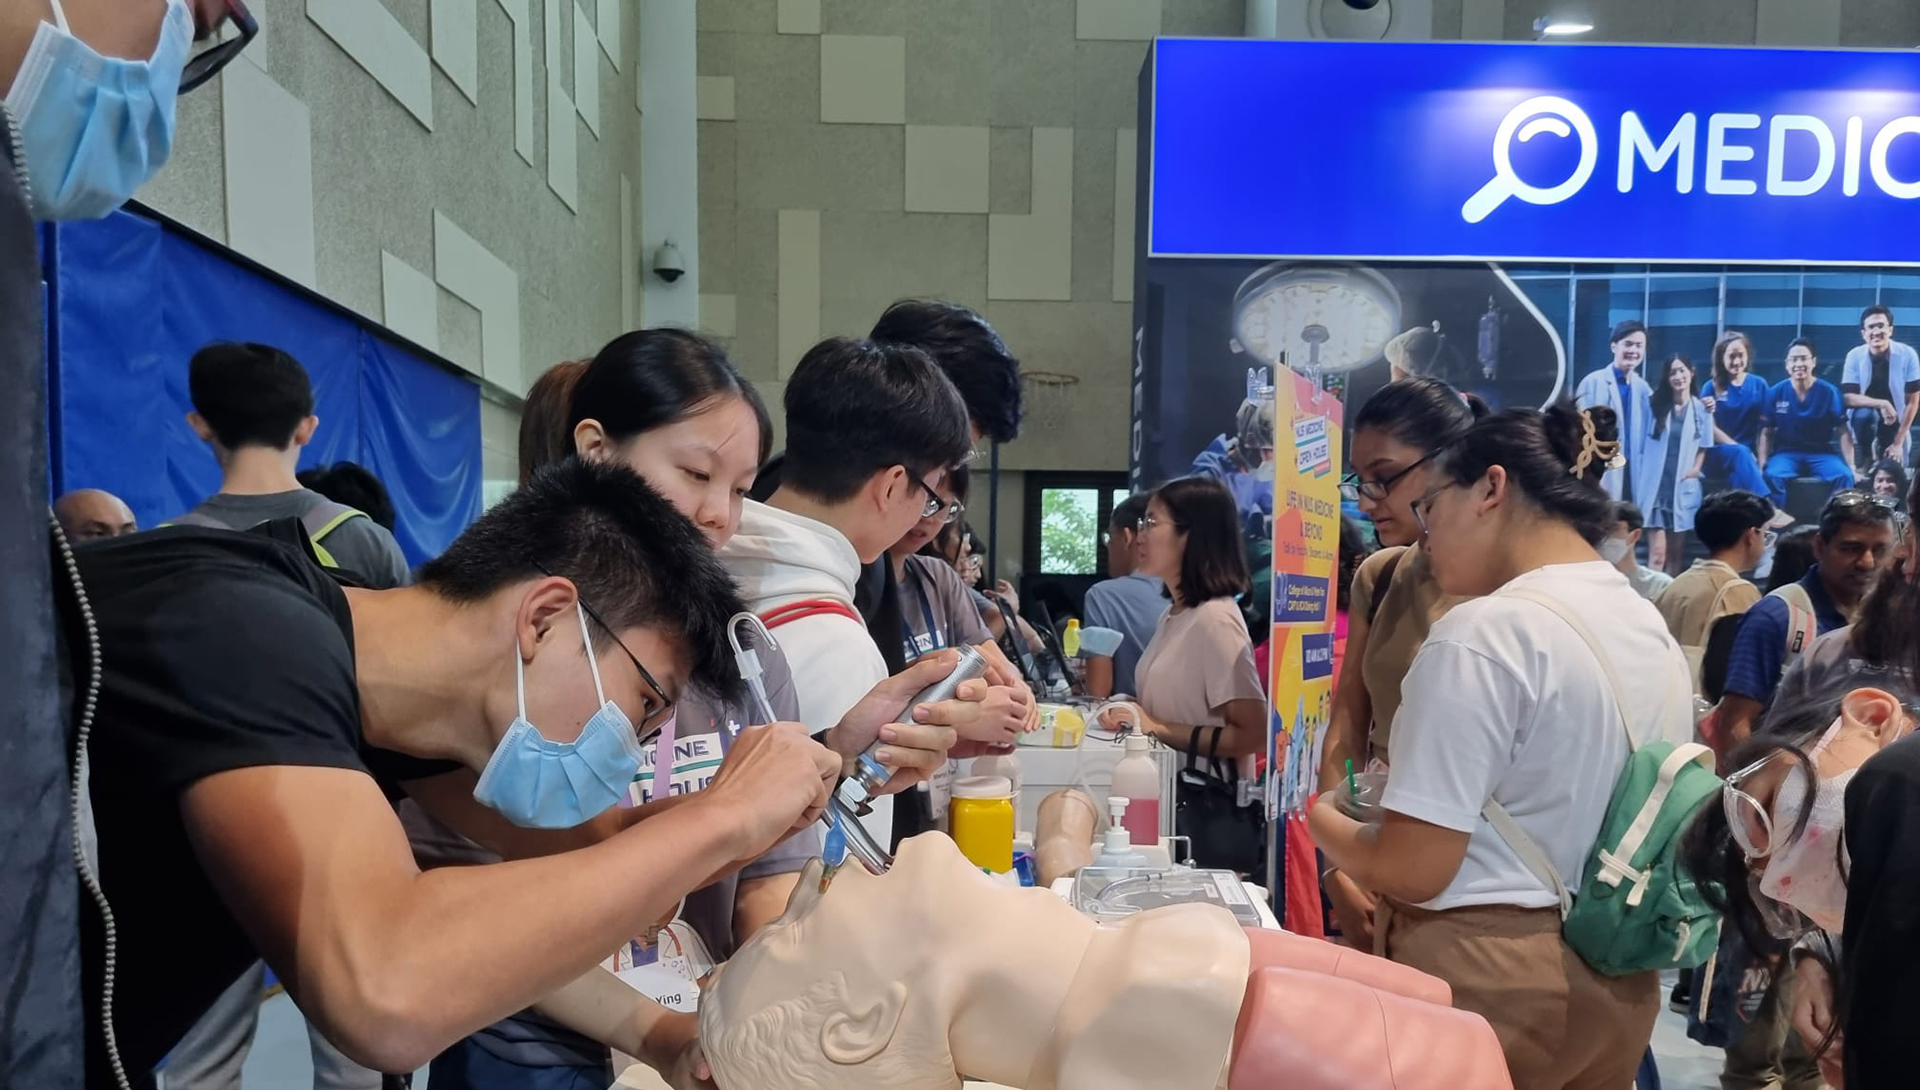 A visitor attempting an intubation procedure using an anatomical model at the NUS Medicine demonstration.